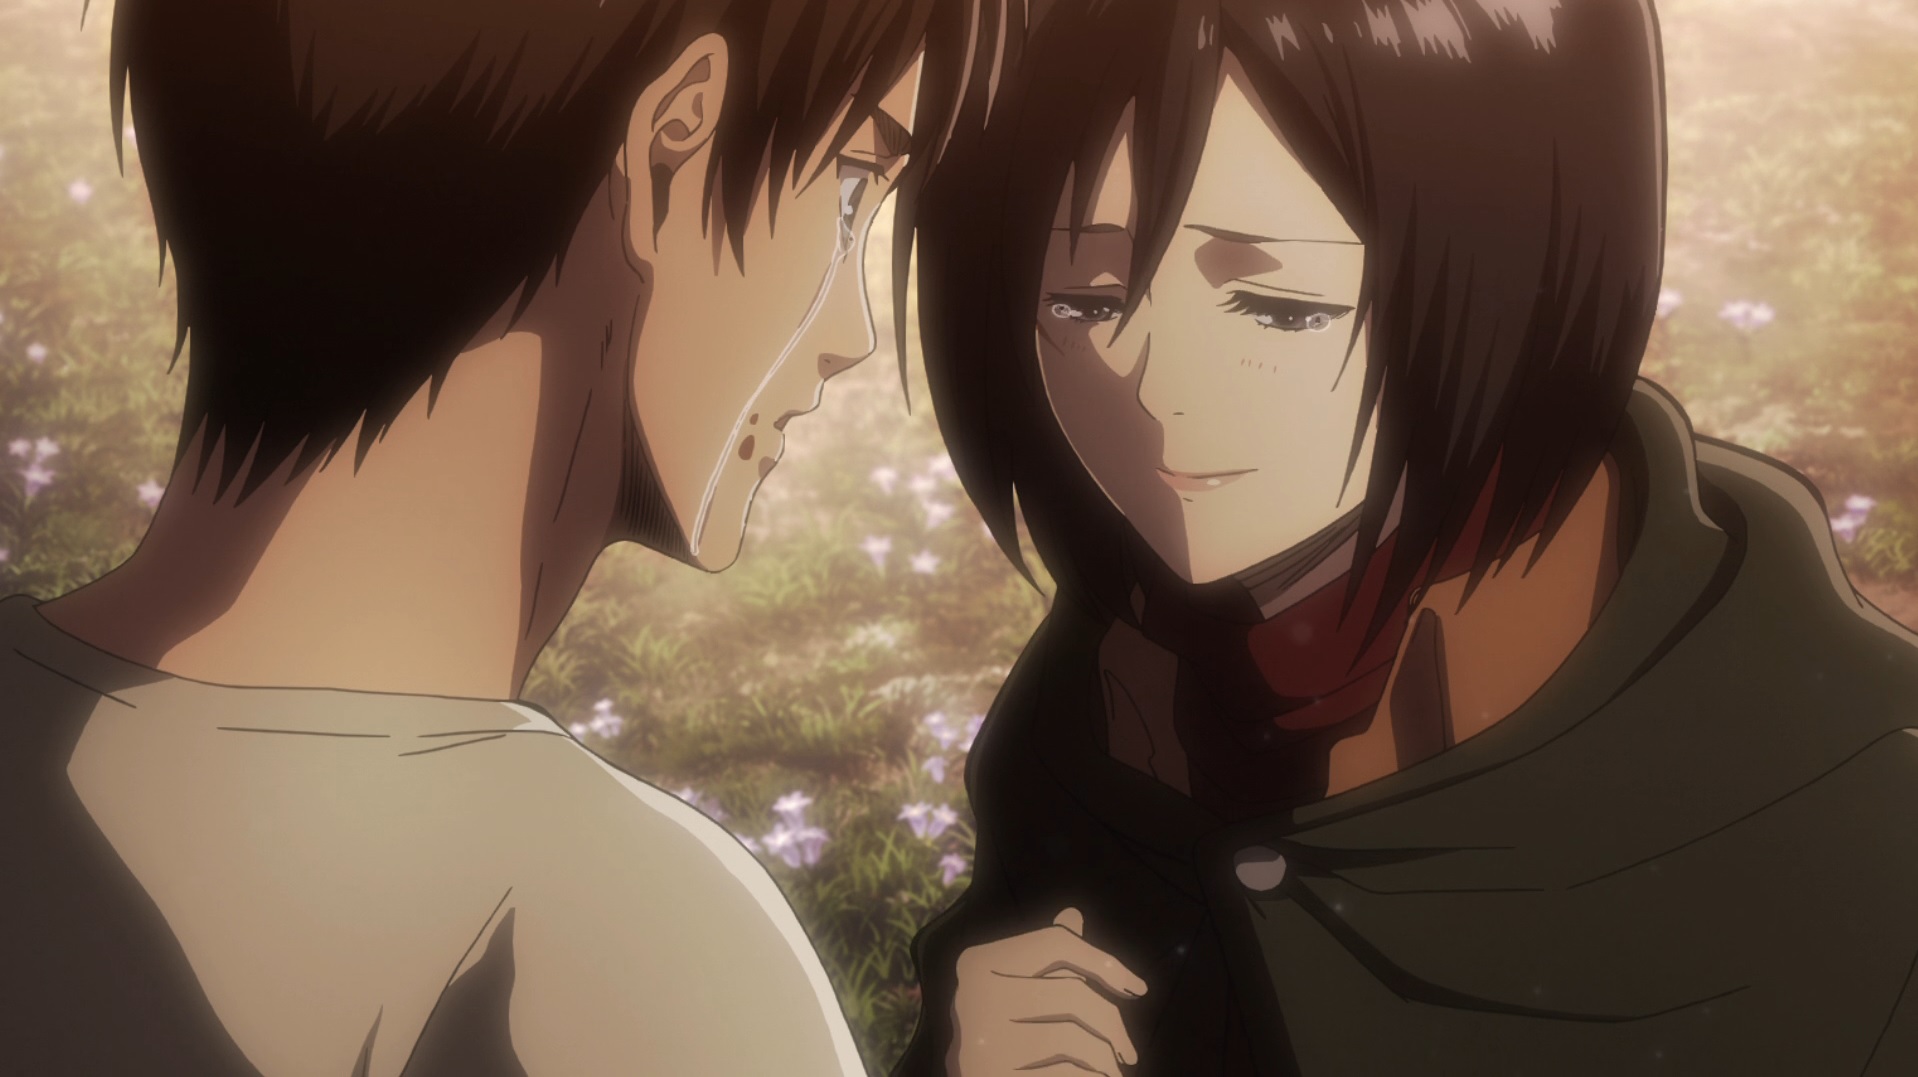 Will Eren and Mikasa End Up Together? Or Will Eren Marry Historia?